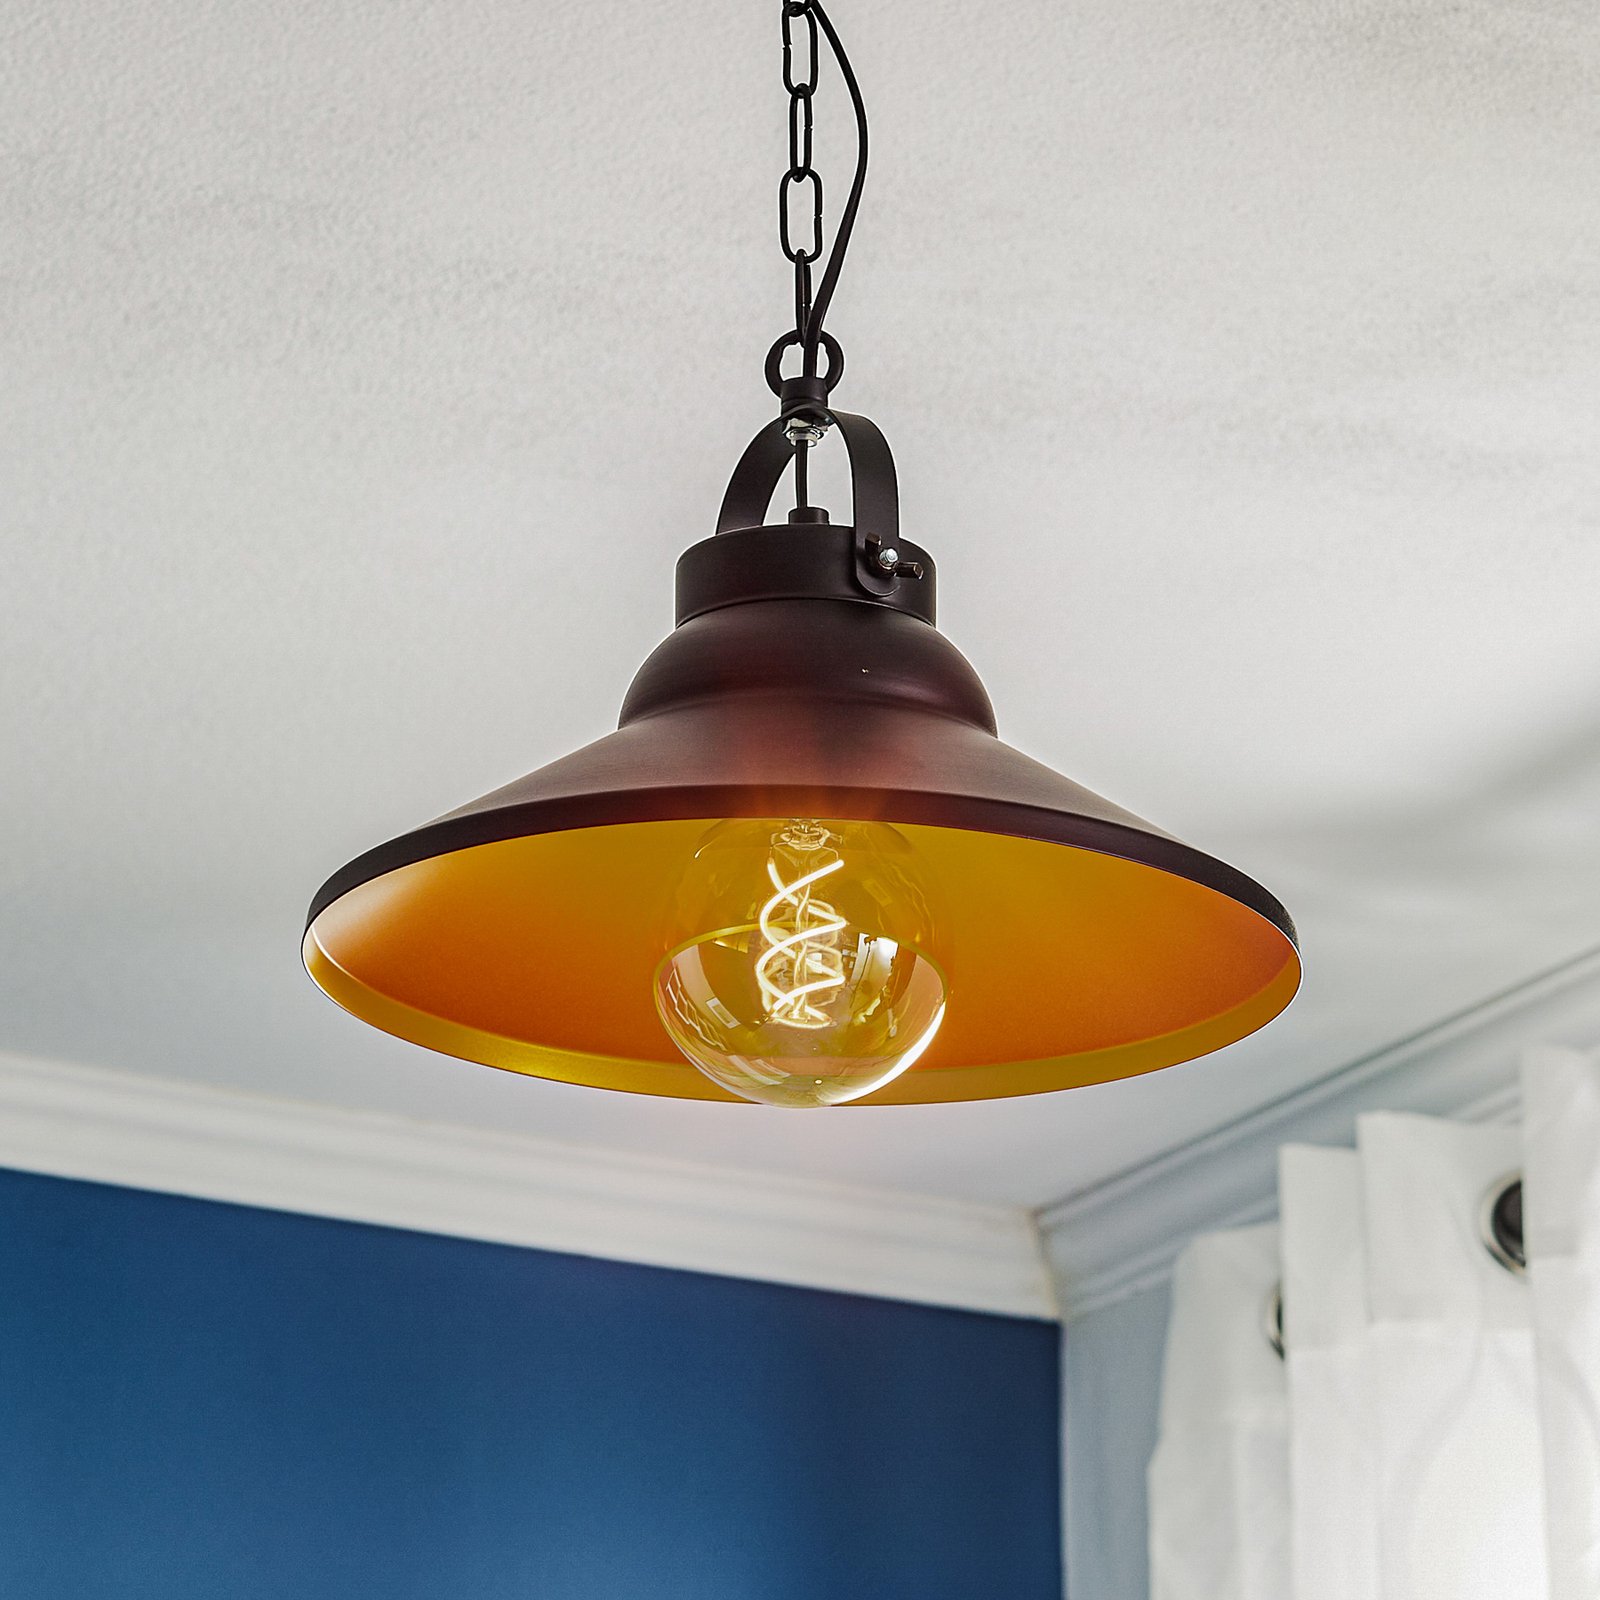 Taft hanging light, lampshade in black and gold